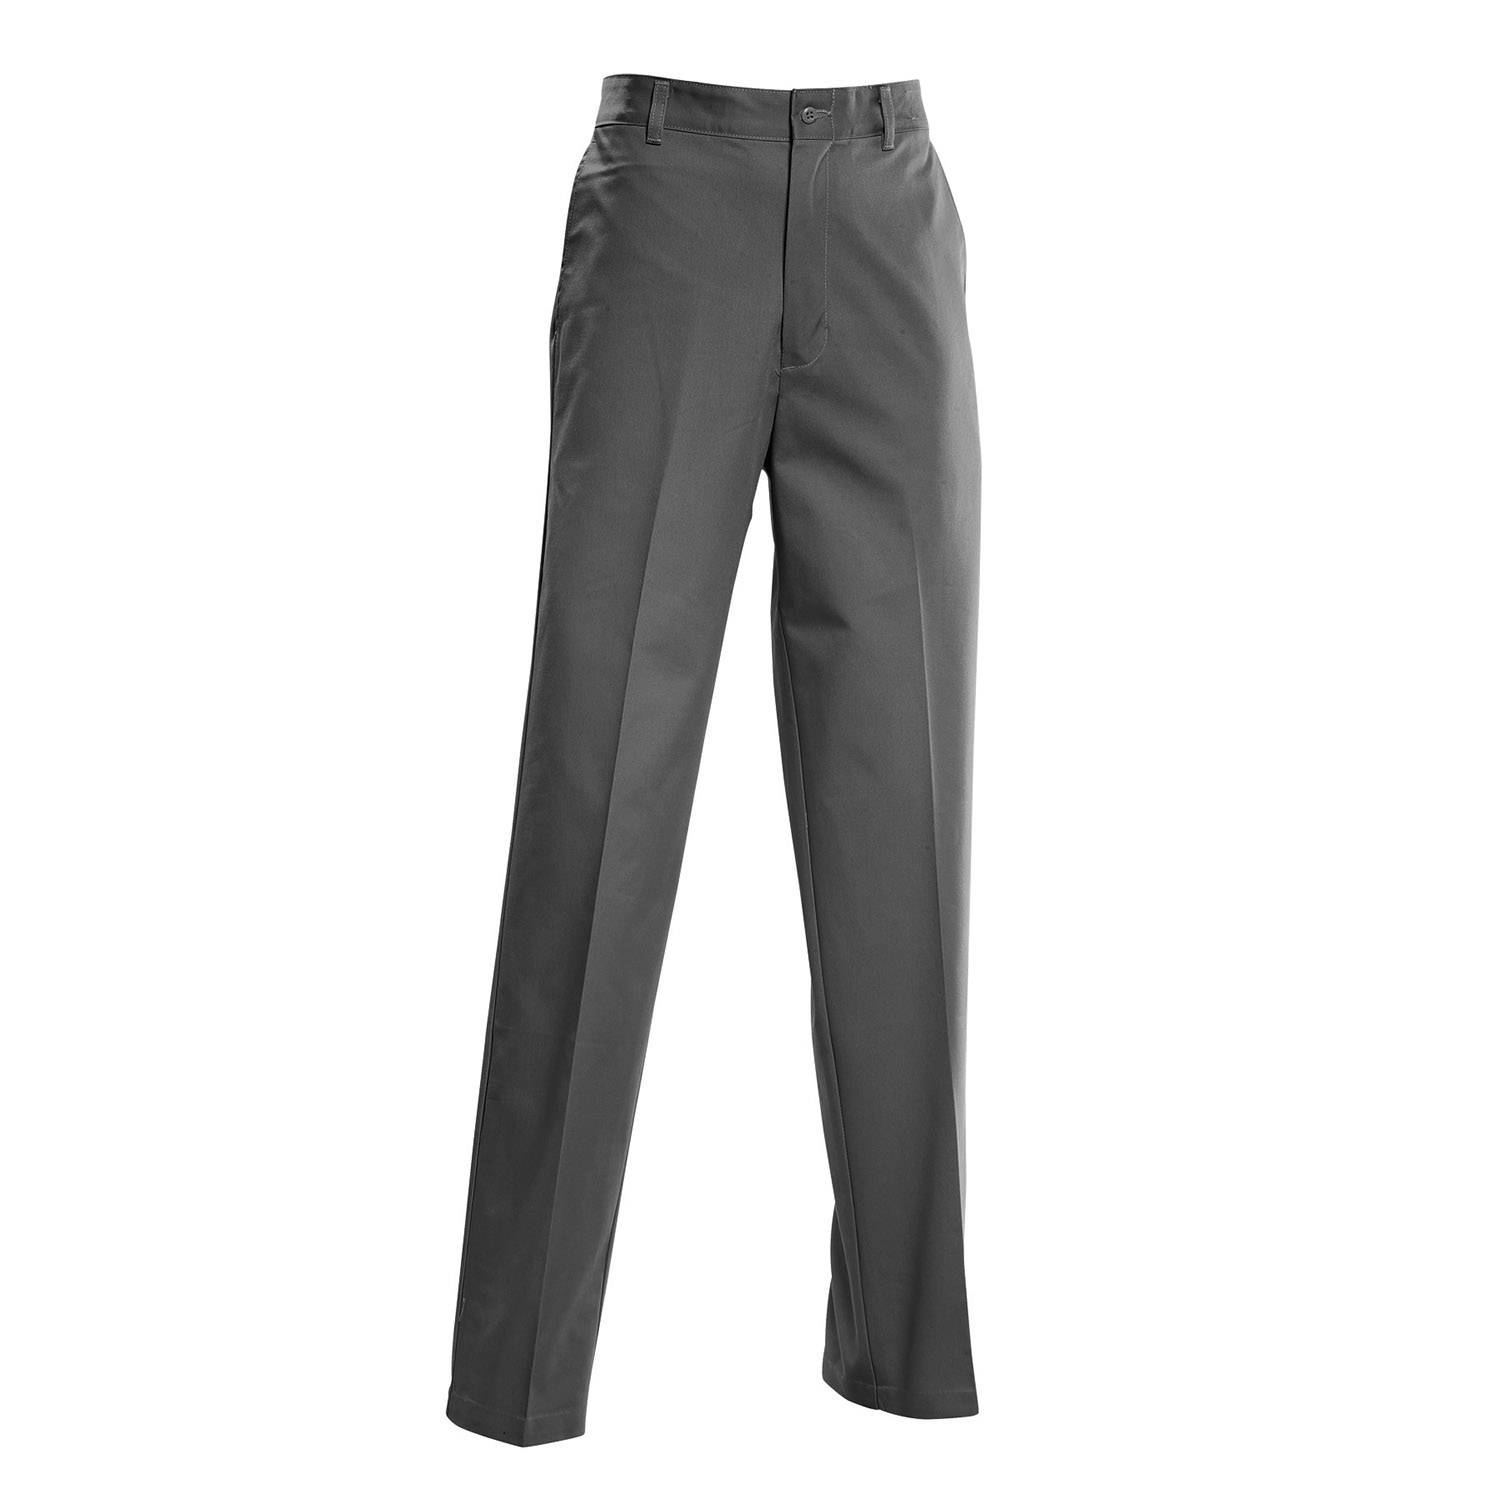 GALLS POLYESTER COTTON TWILL WORK PANTS